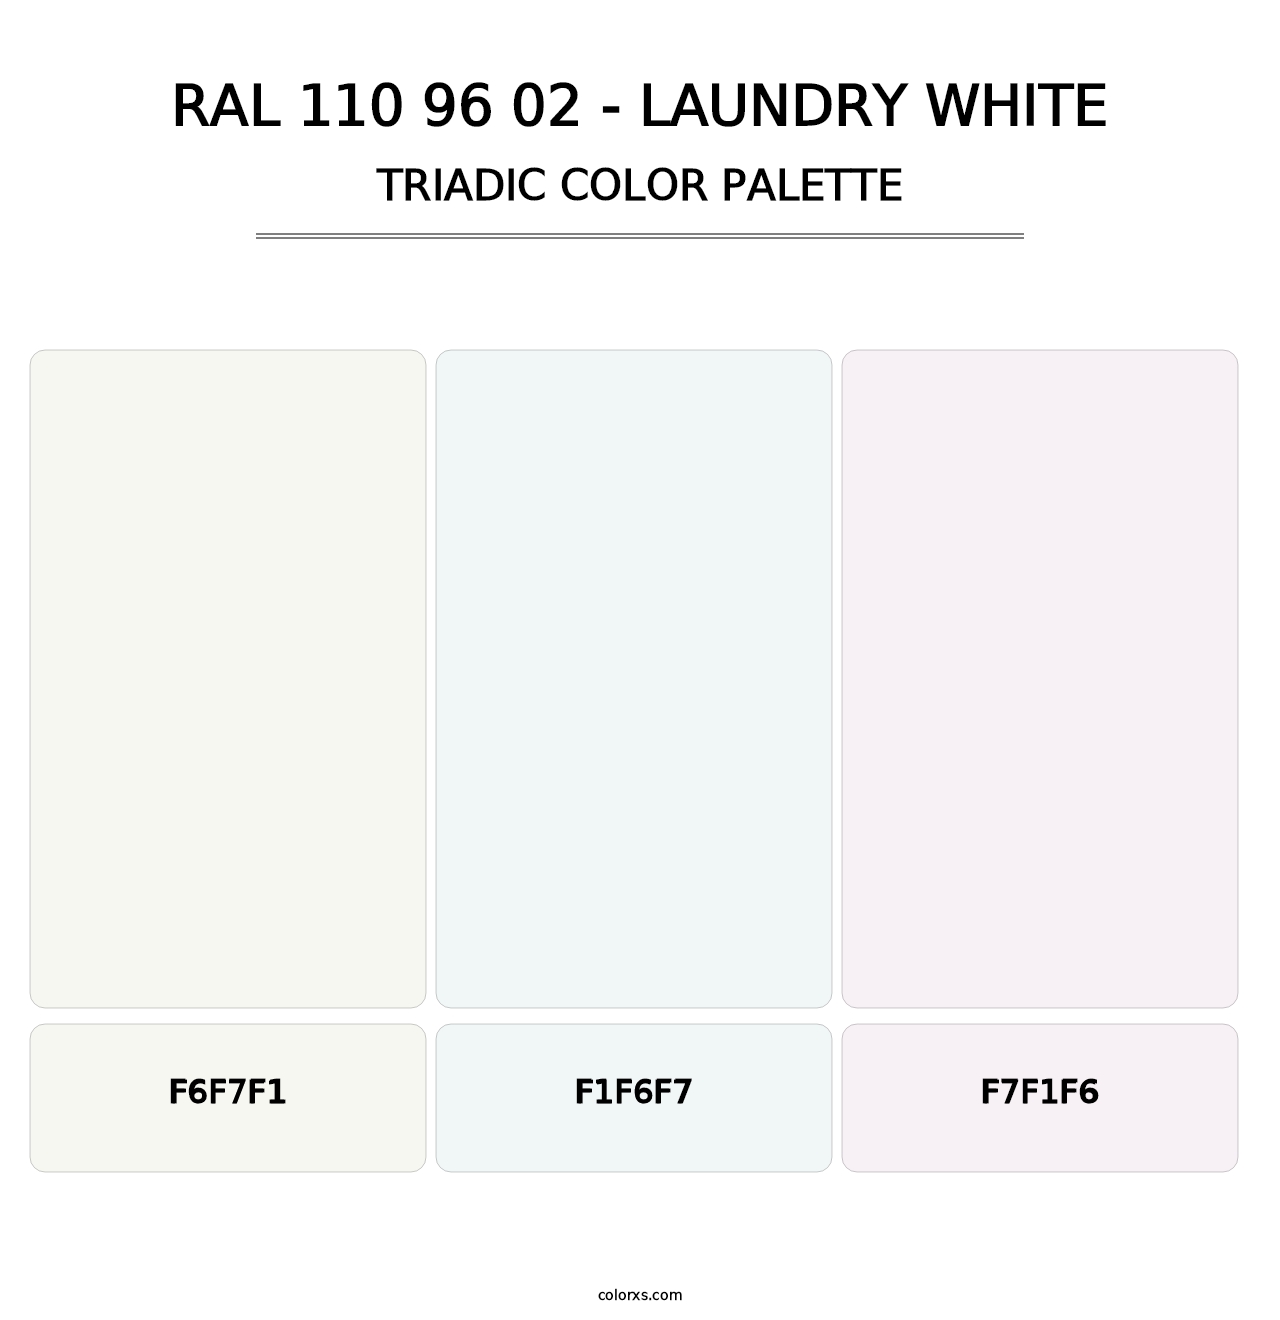 RAL 110 96 02 - Laundry White - Triadic Color Palette